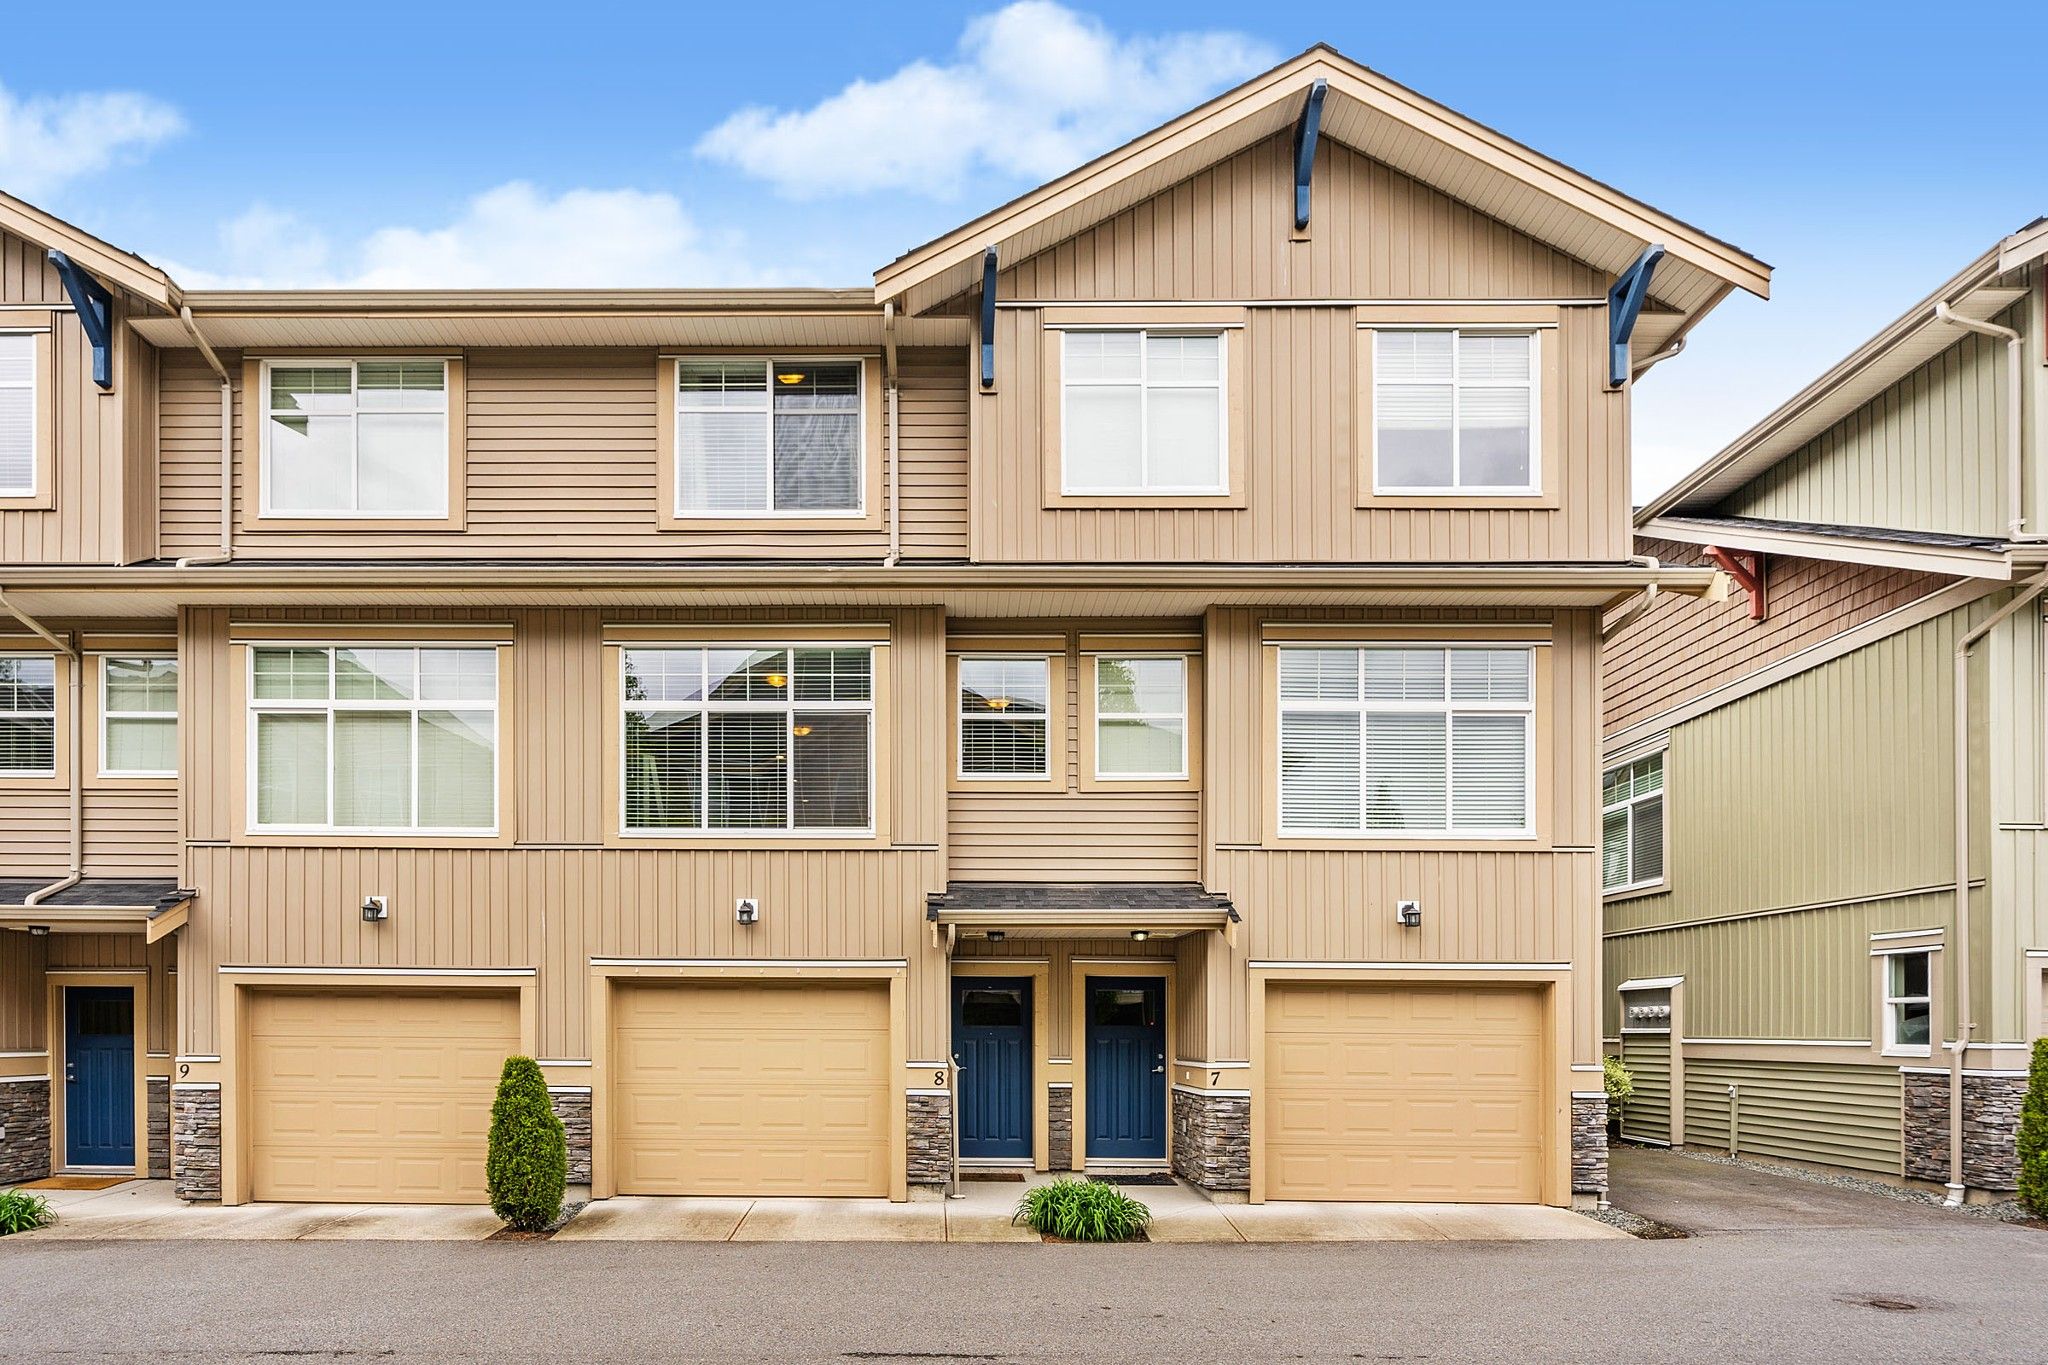 We have sold a property at 8 20966 77A AVE in Langley